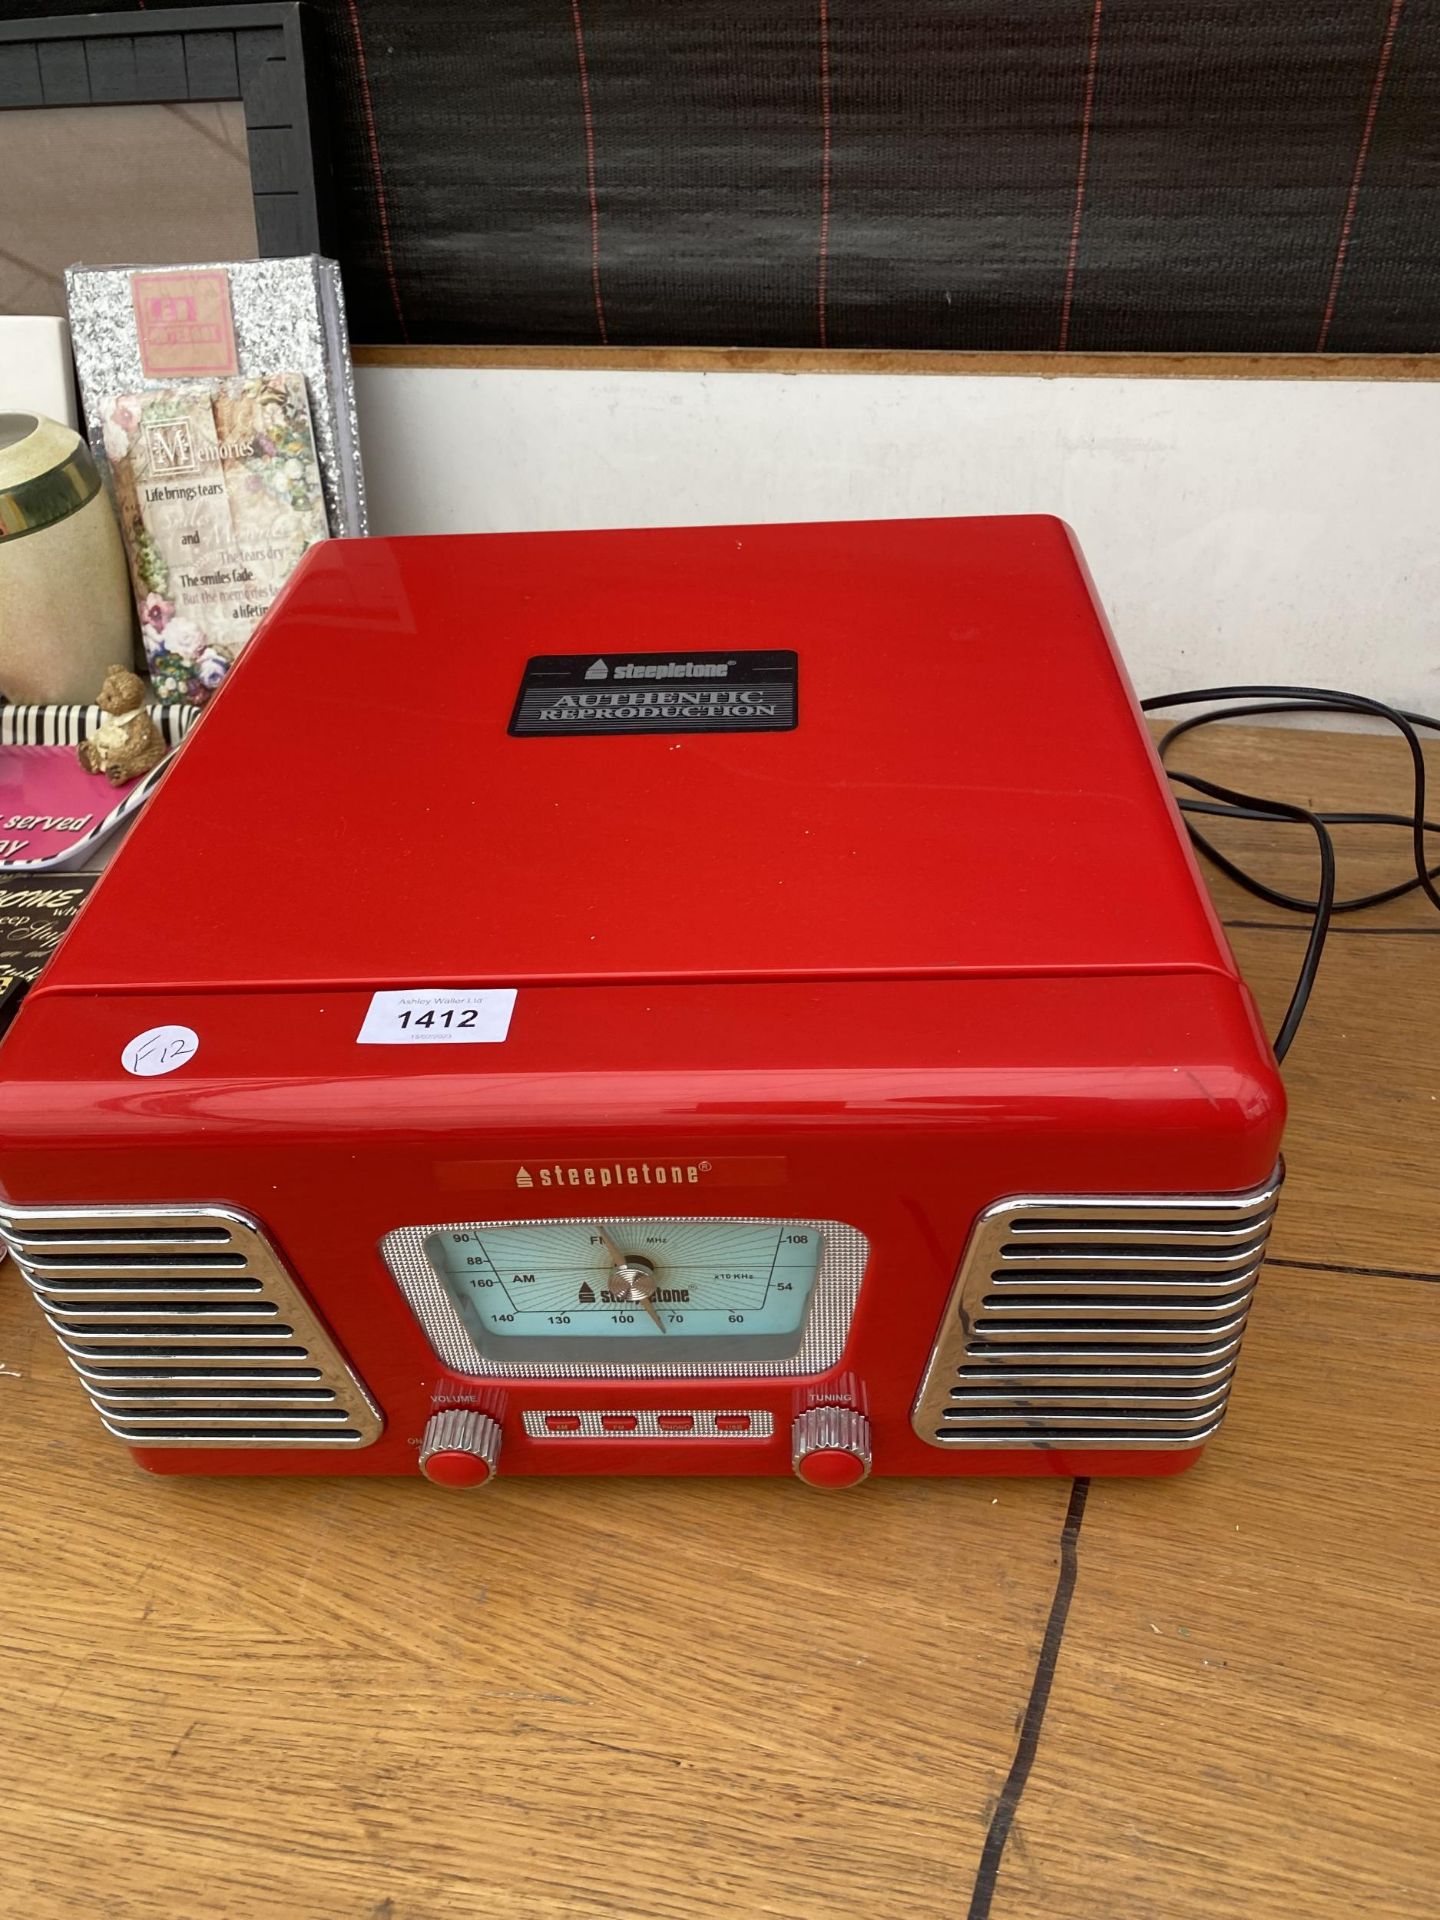 A STEEPLETONE RECORD PLAYER WITH BUILT IN SPEAKERS